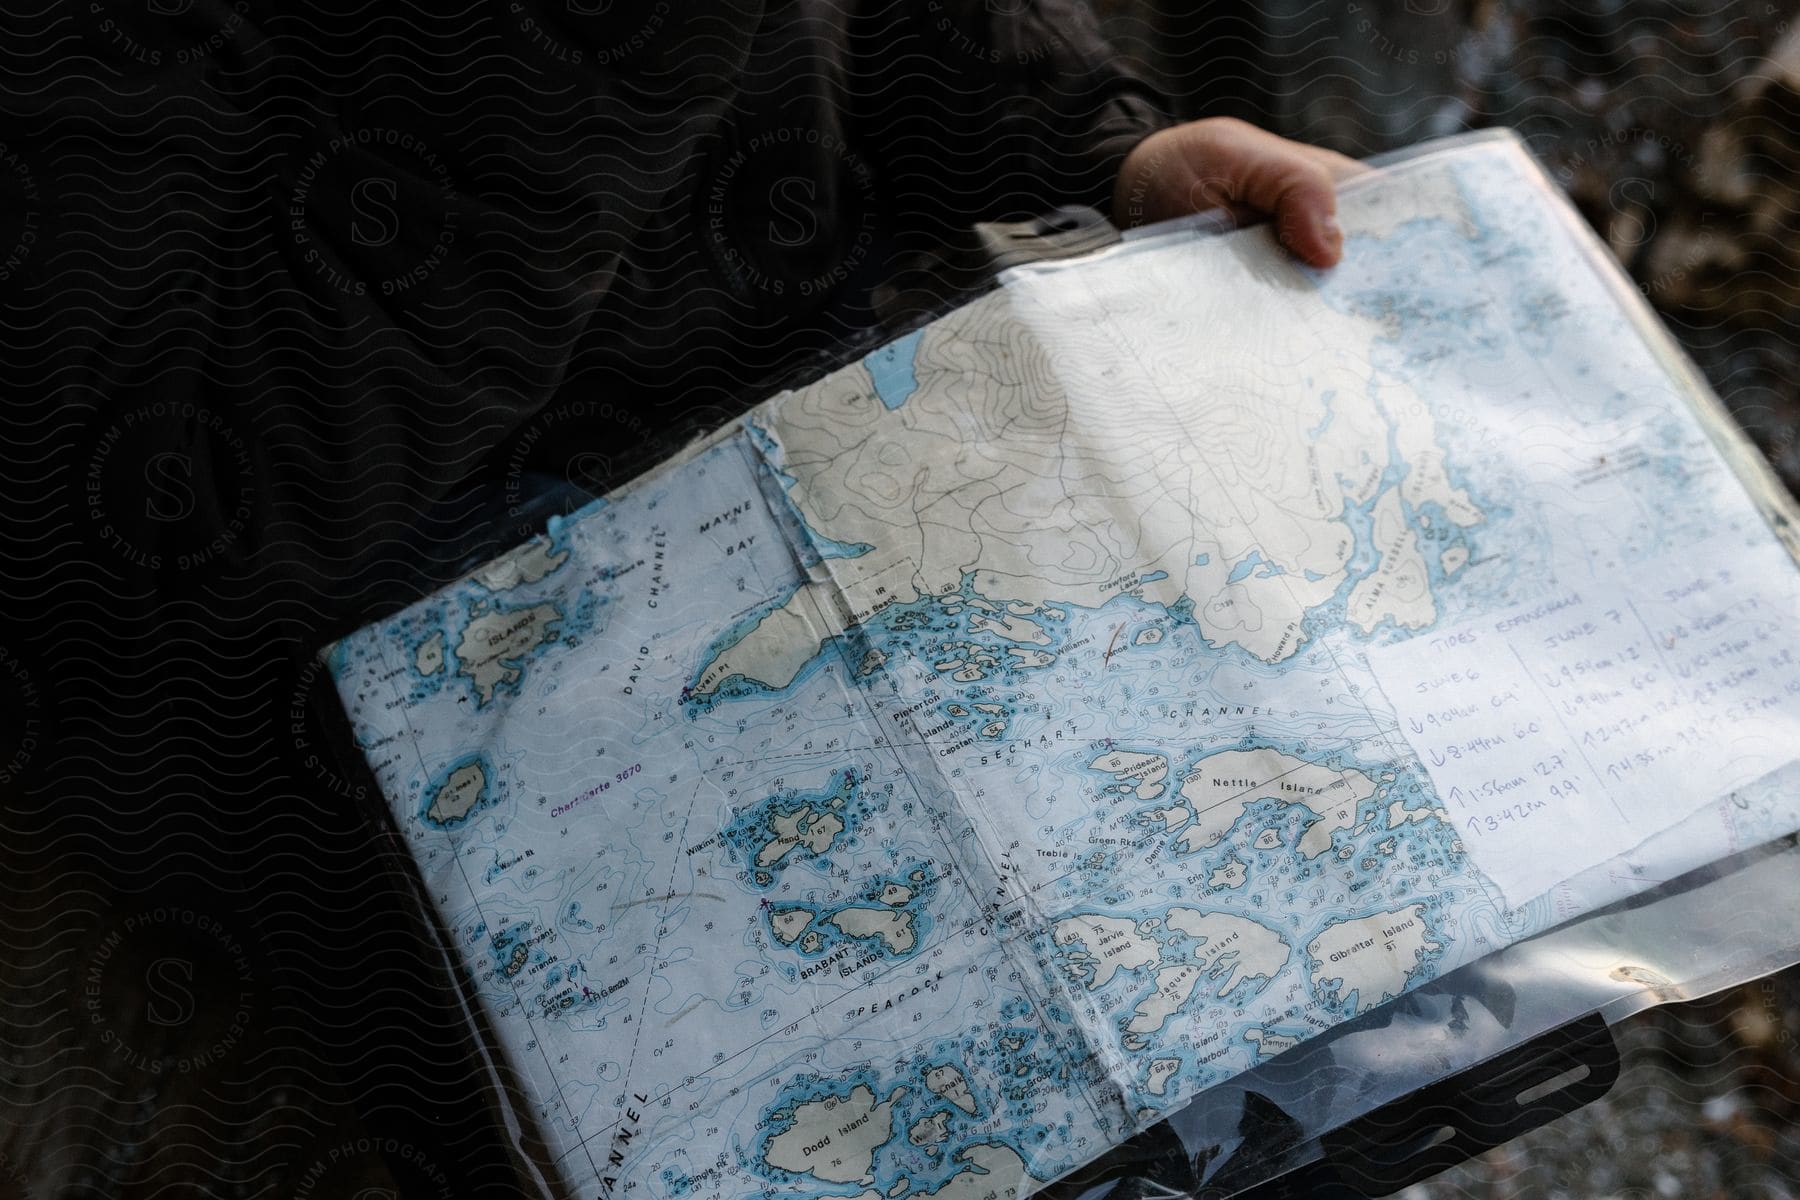 A person in a long-sleeved shirt holds a map in their hand